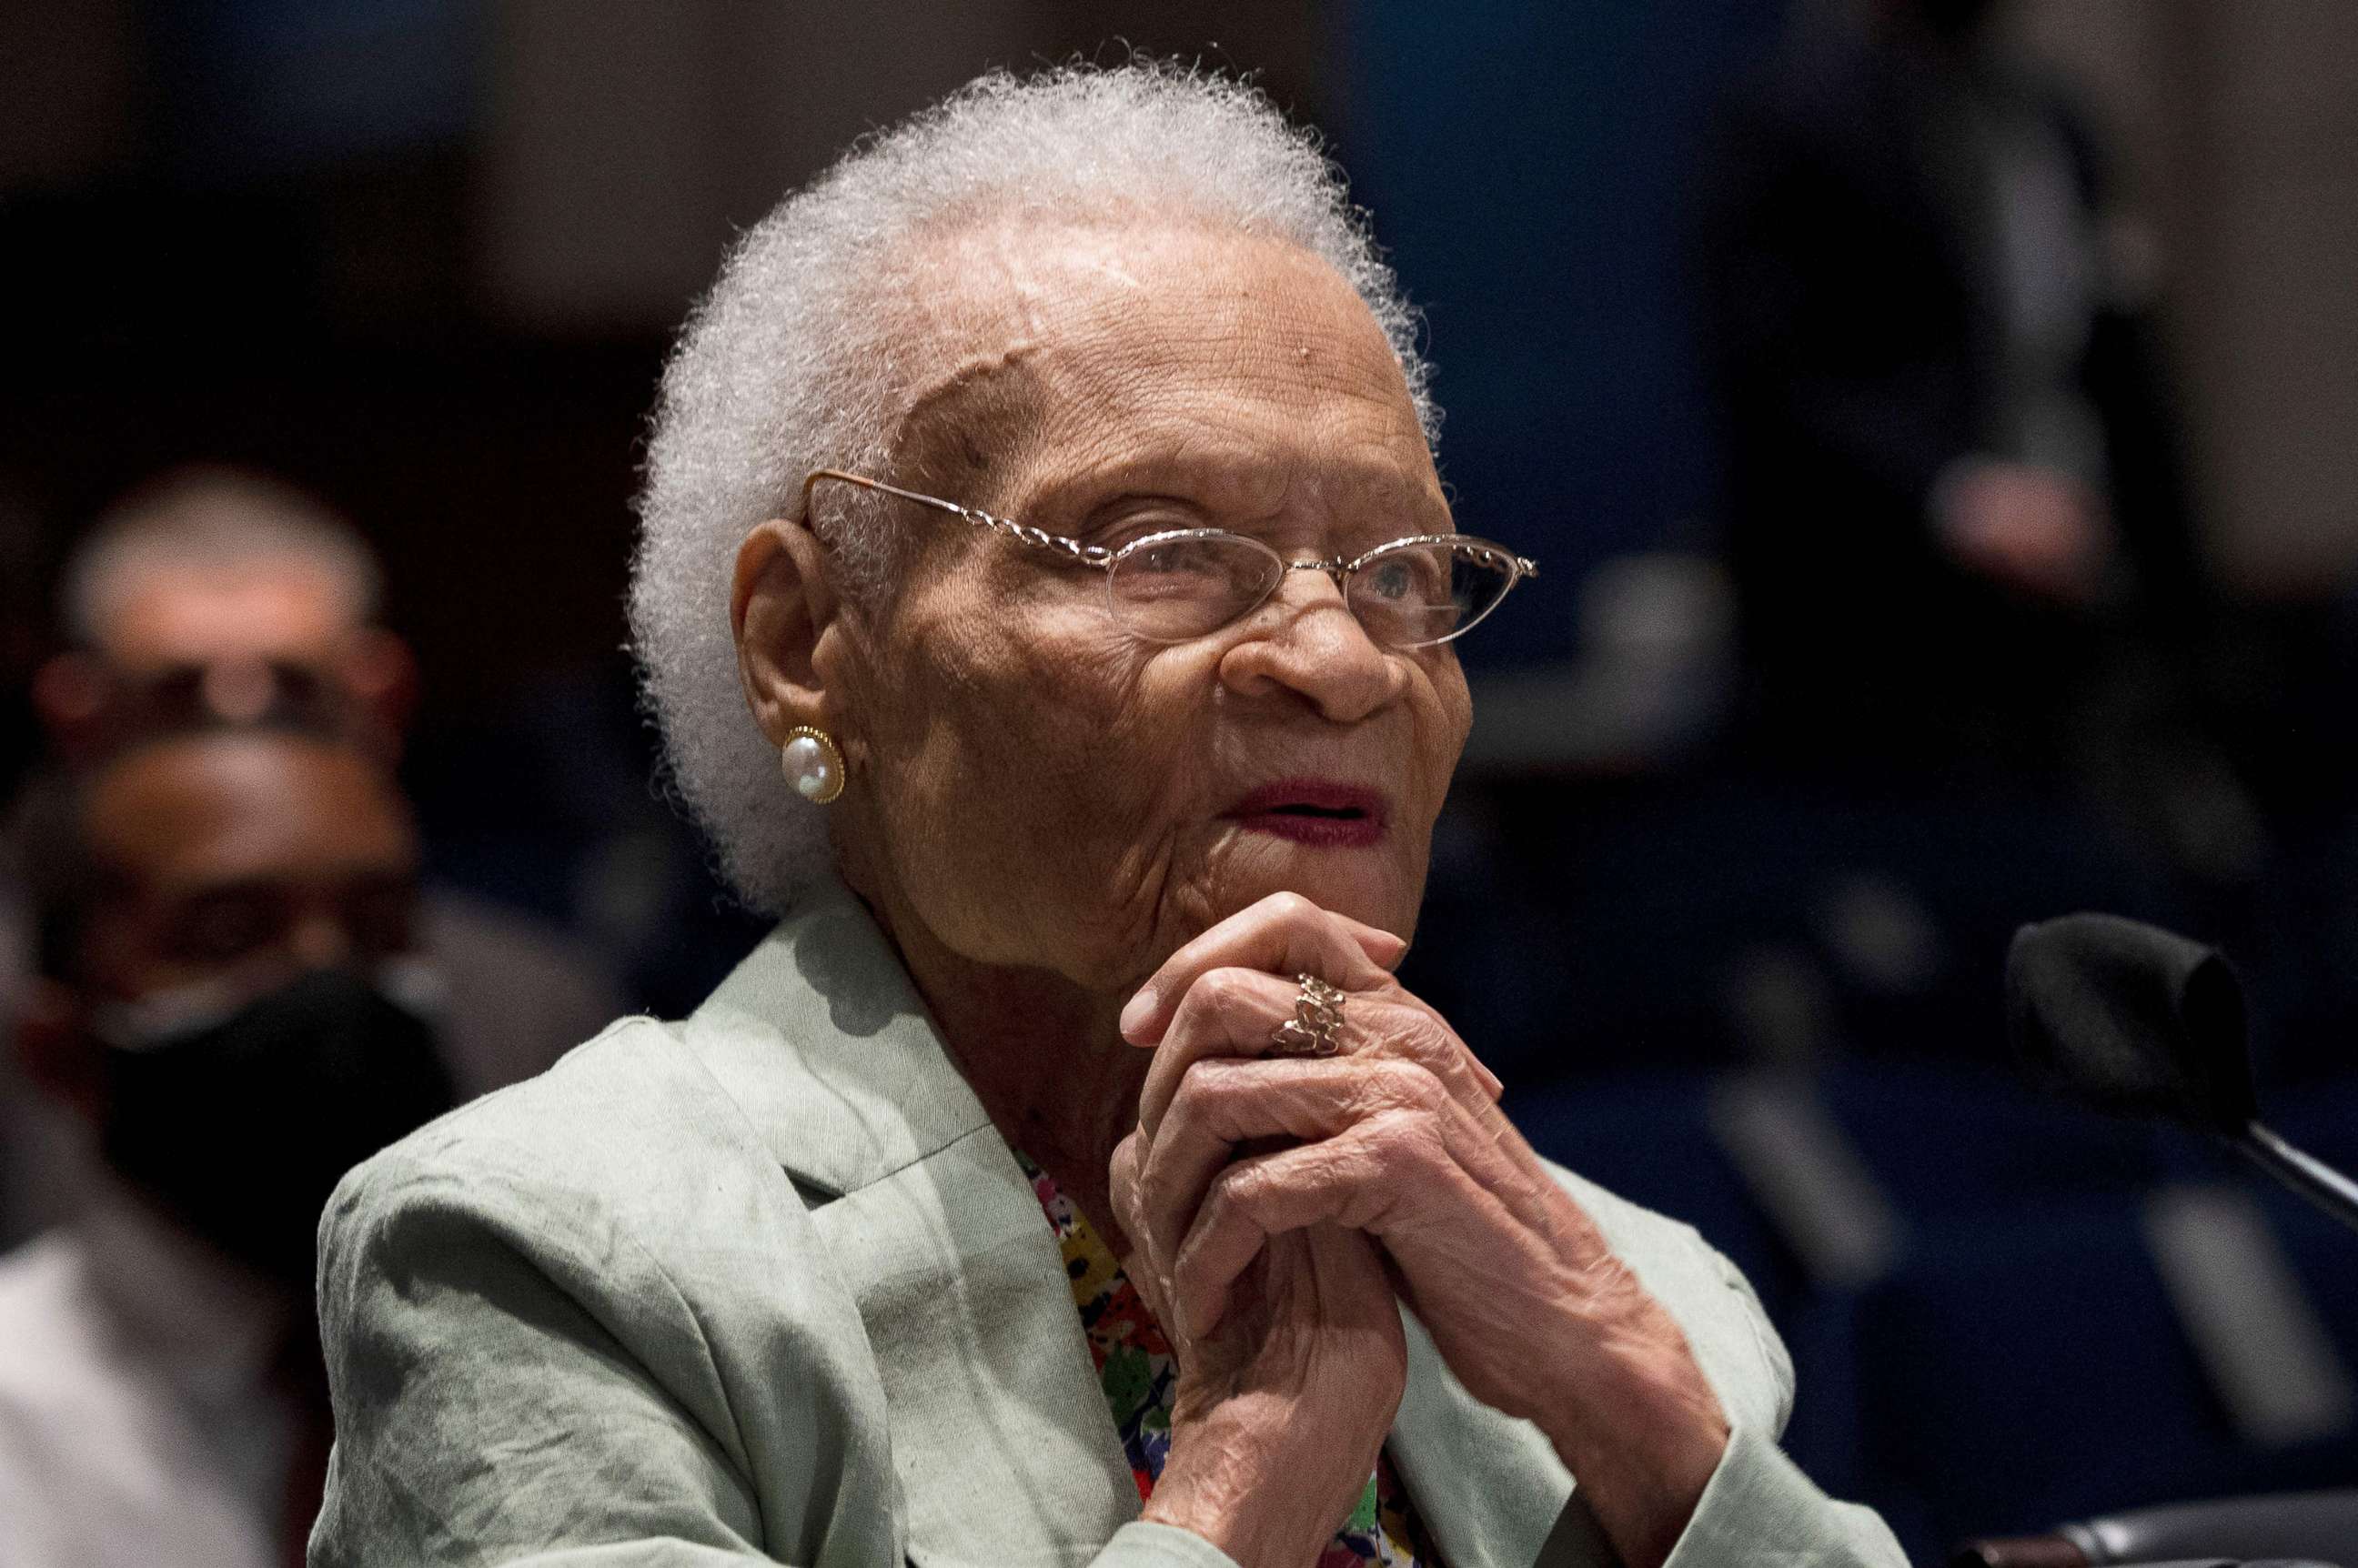 PHOTO: Viola Fletcher, the oldest living survivor of the Tulsa Race Massacre, testifies at at hearing on "Continuing Injustice: The Centennial of the Tulsa-Greenwood Race Massacre" on Capitol Hill in Washington, DC on May 19, 2021.